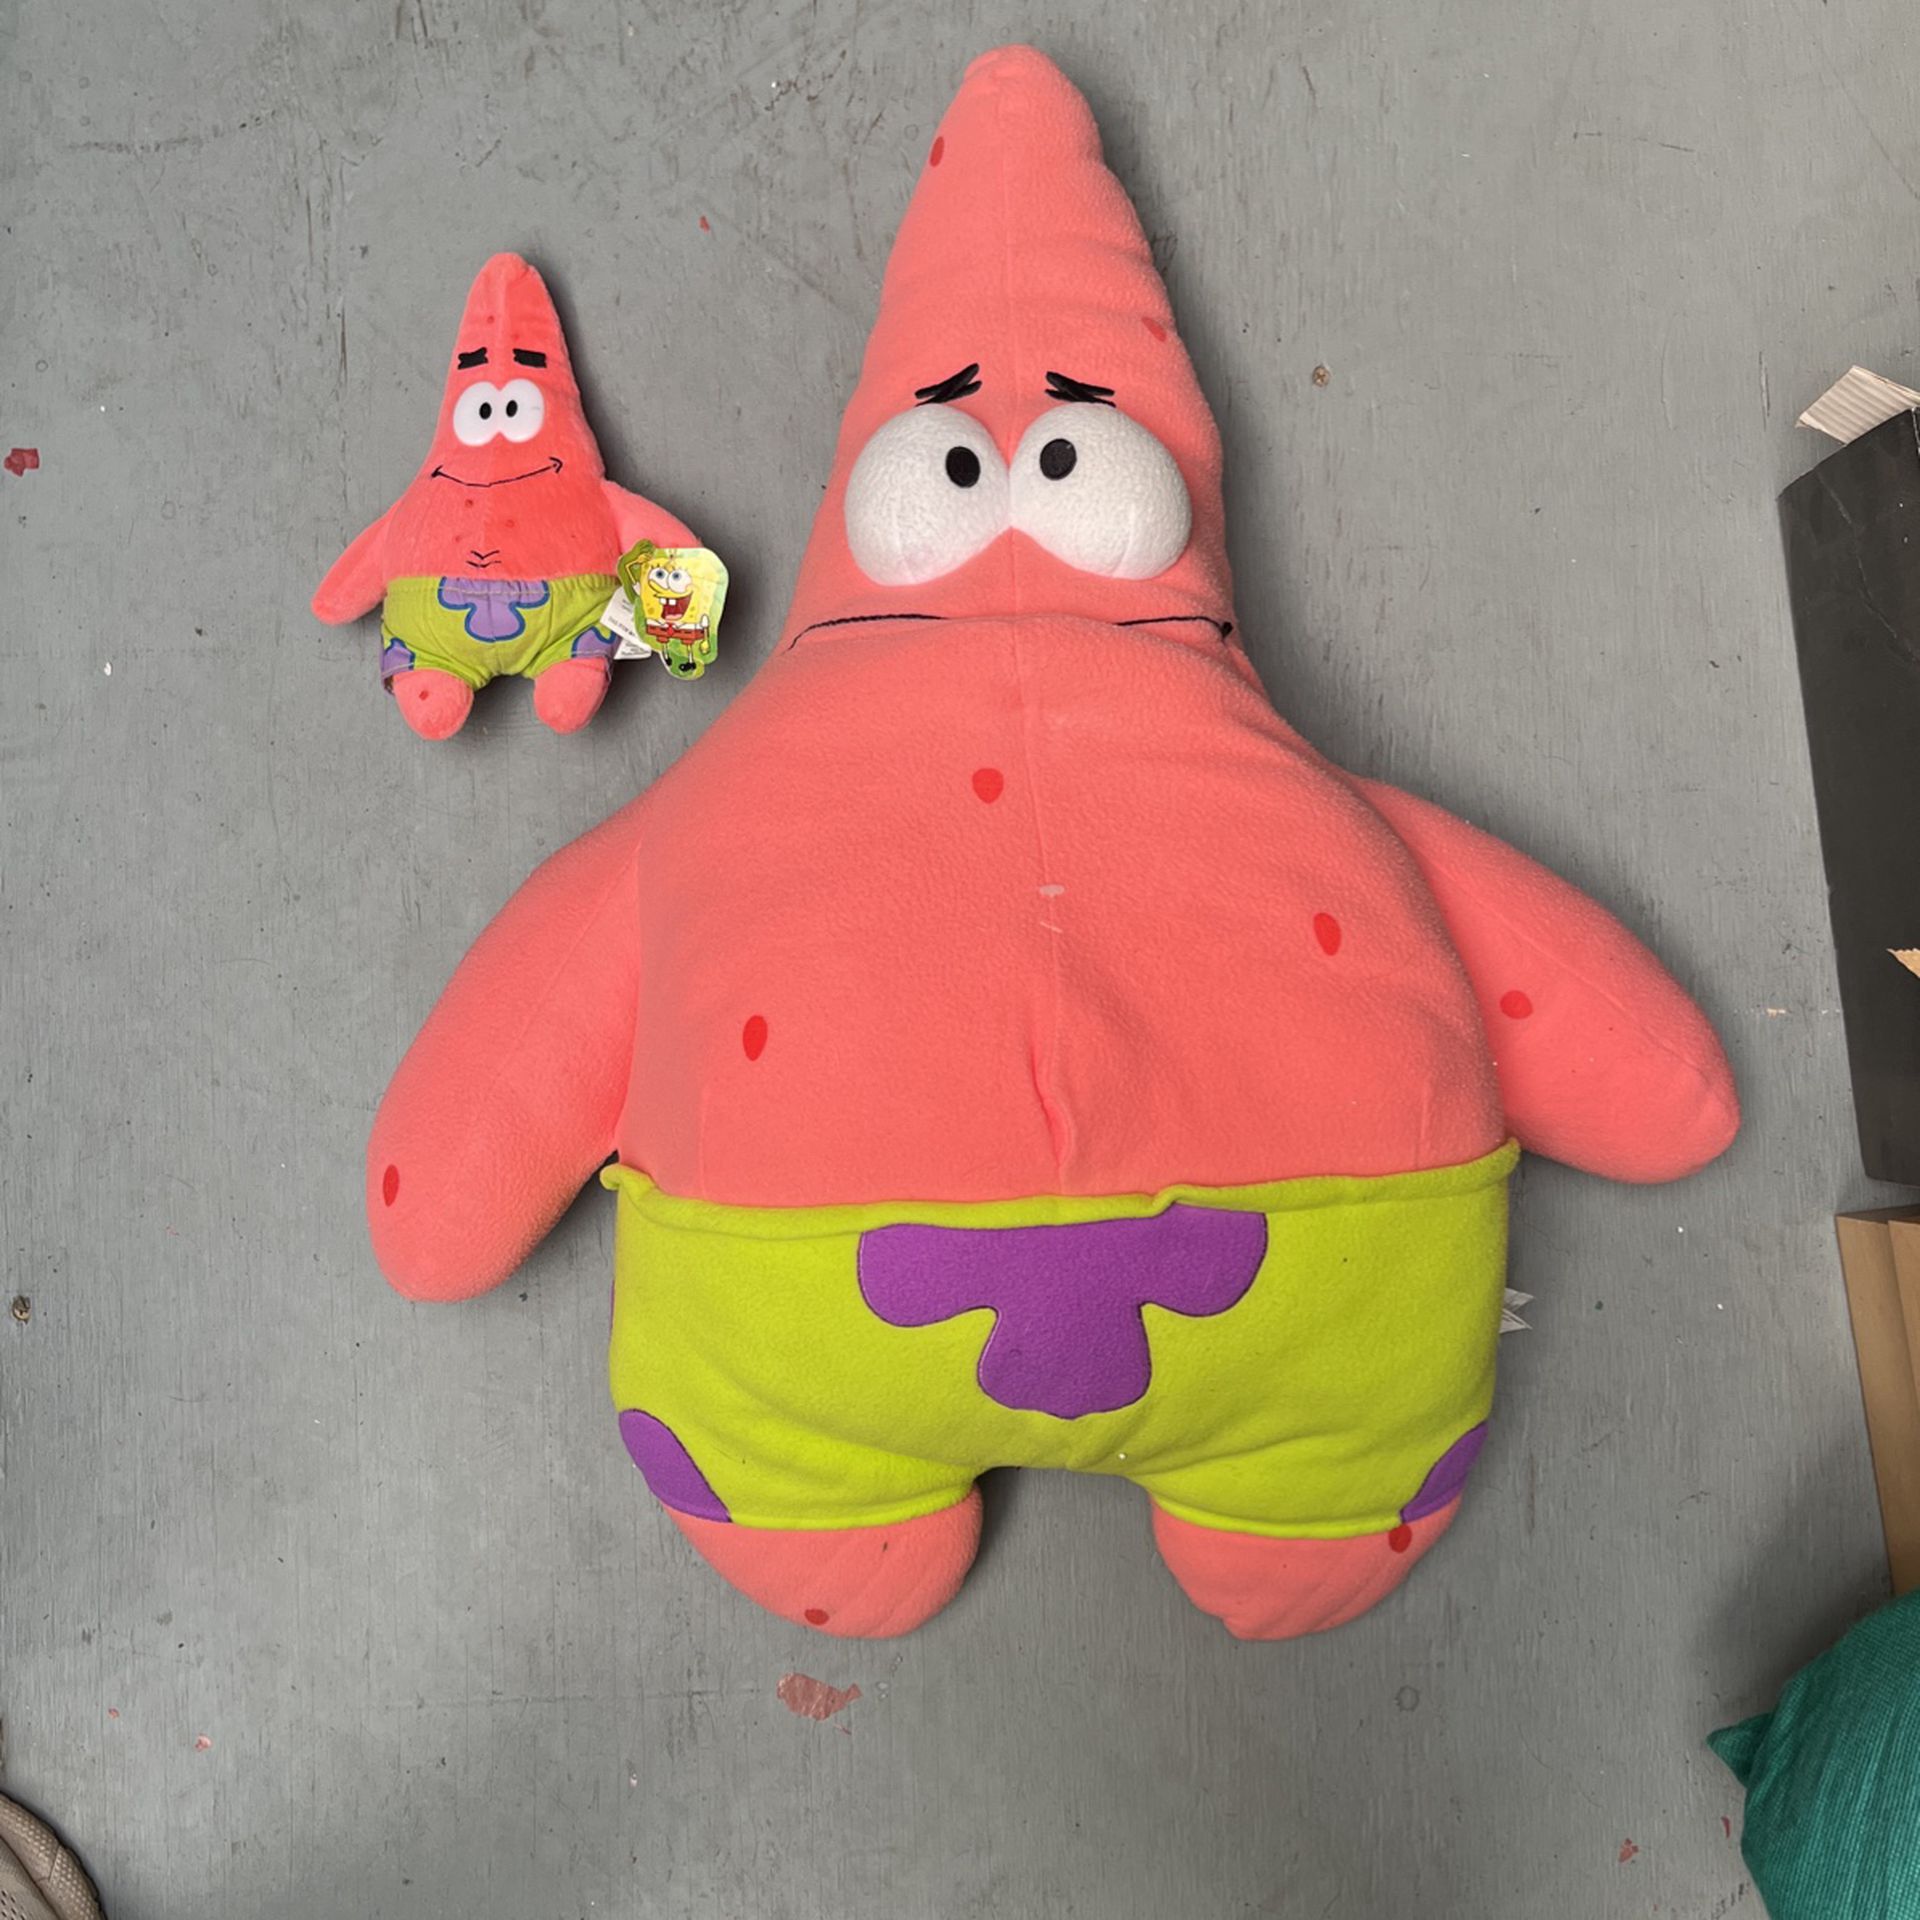 Giant Patrick the starfish and baby version 